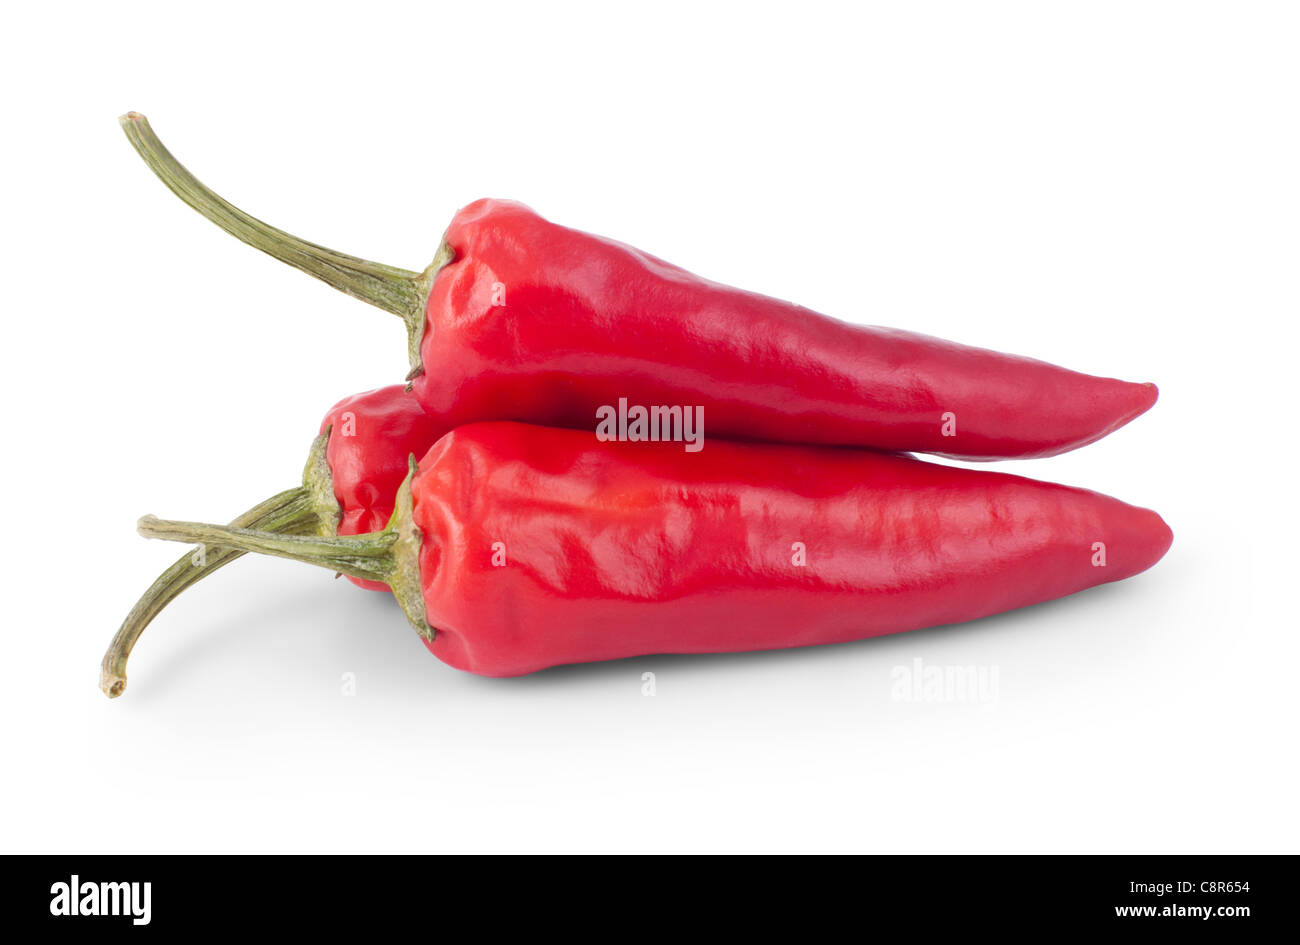 Red chili pepper isolated on white background Stock Photo